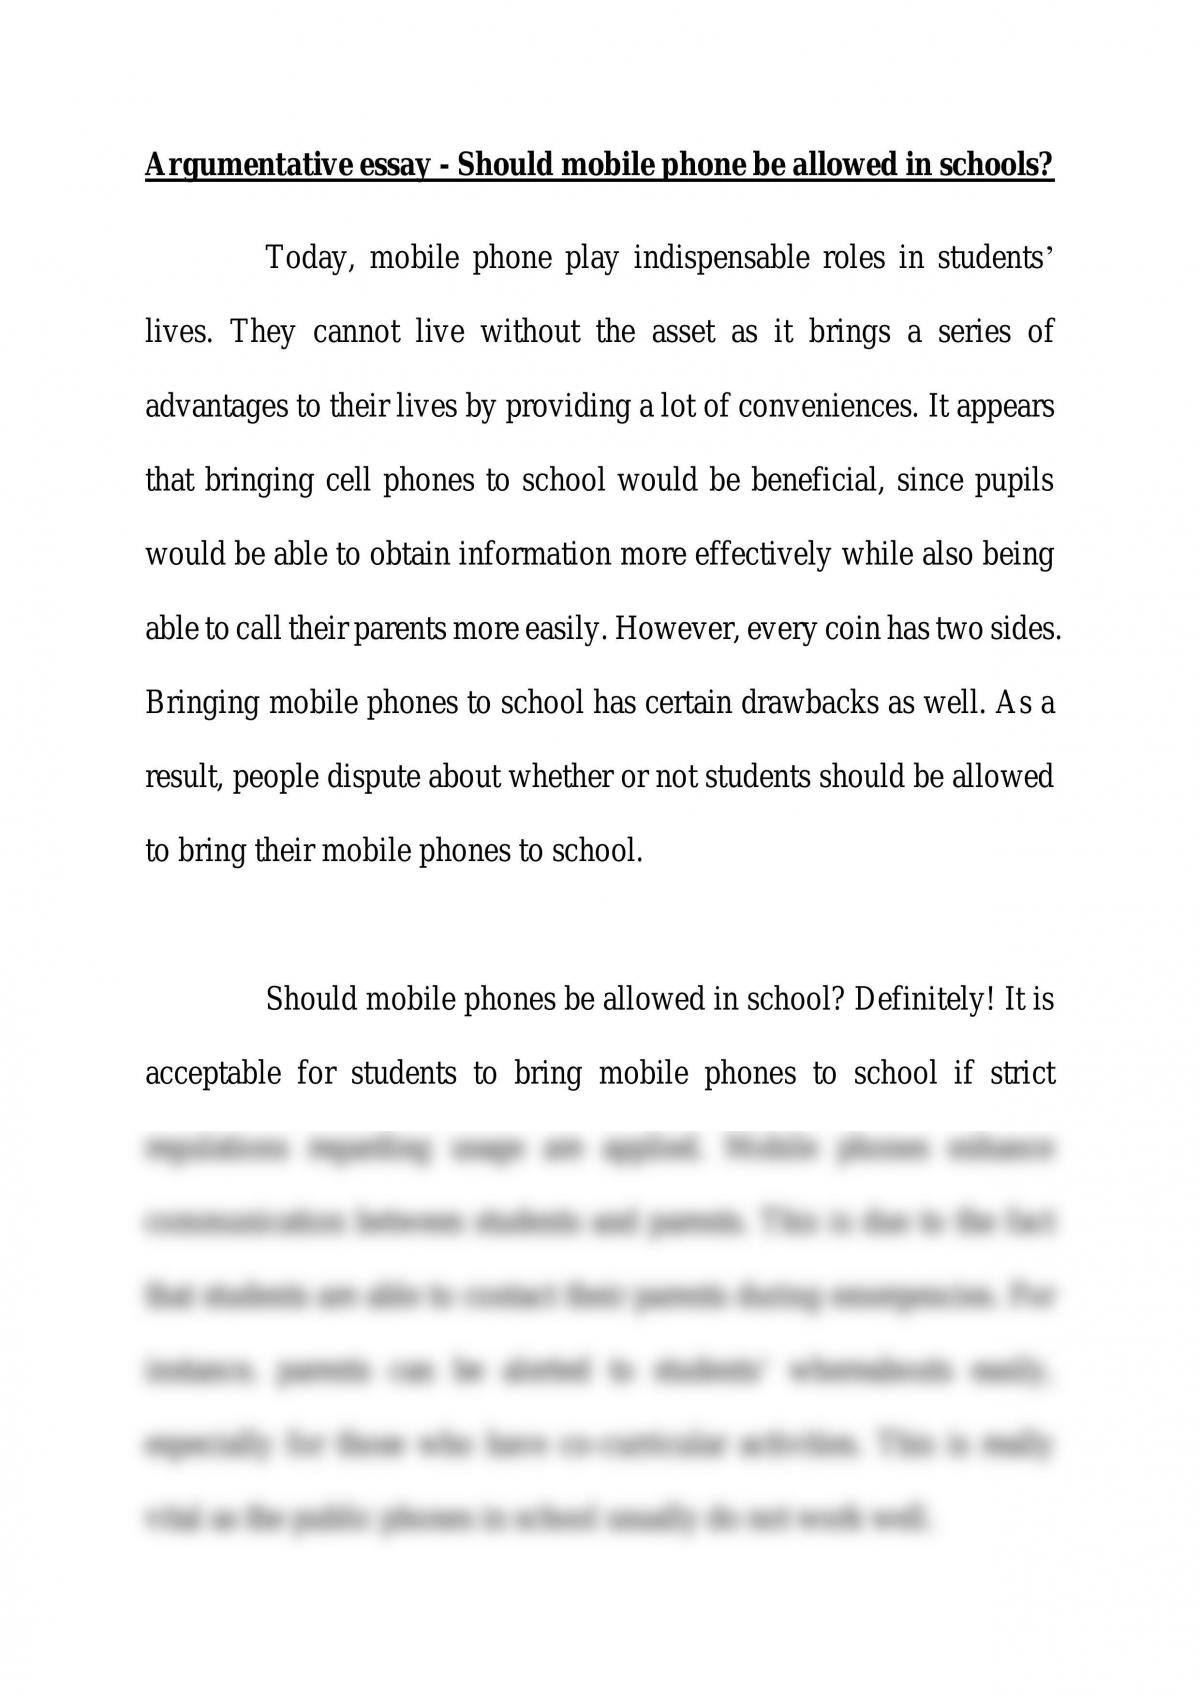 cell phones should be allowed in schools essay examples